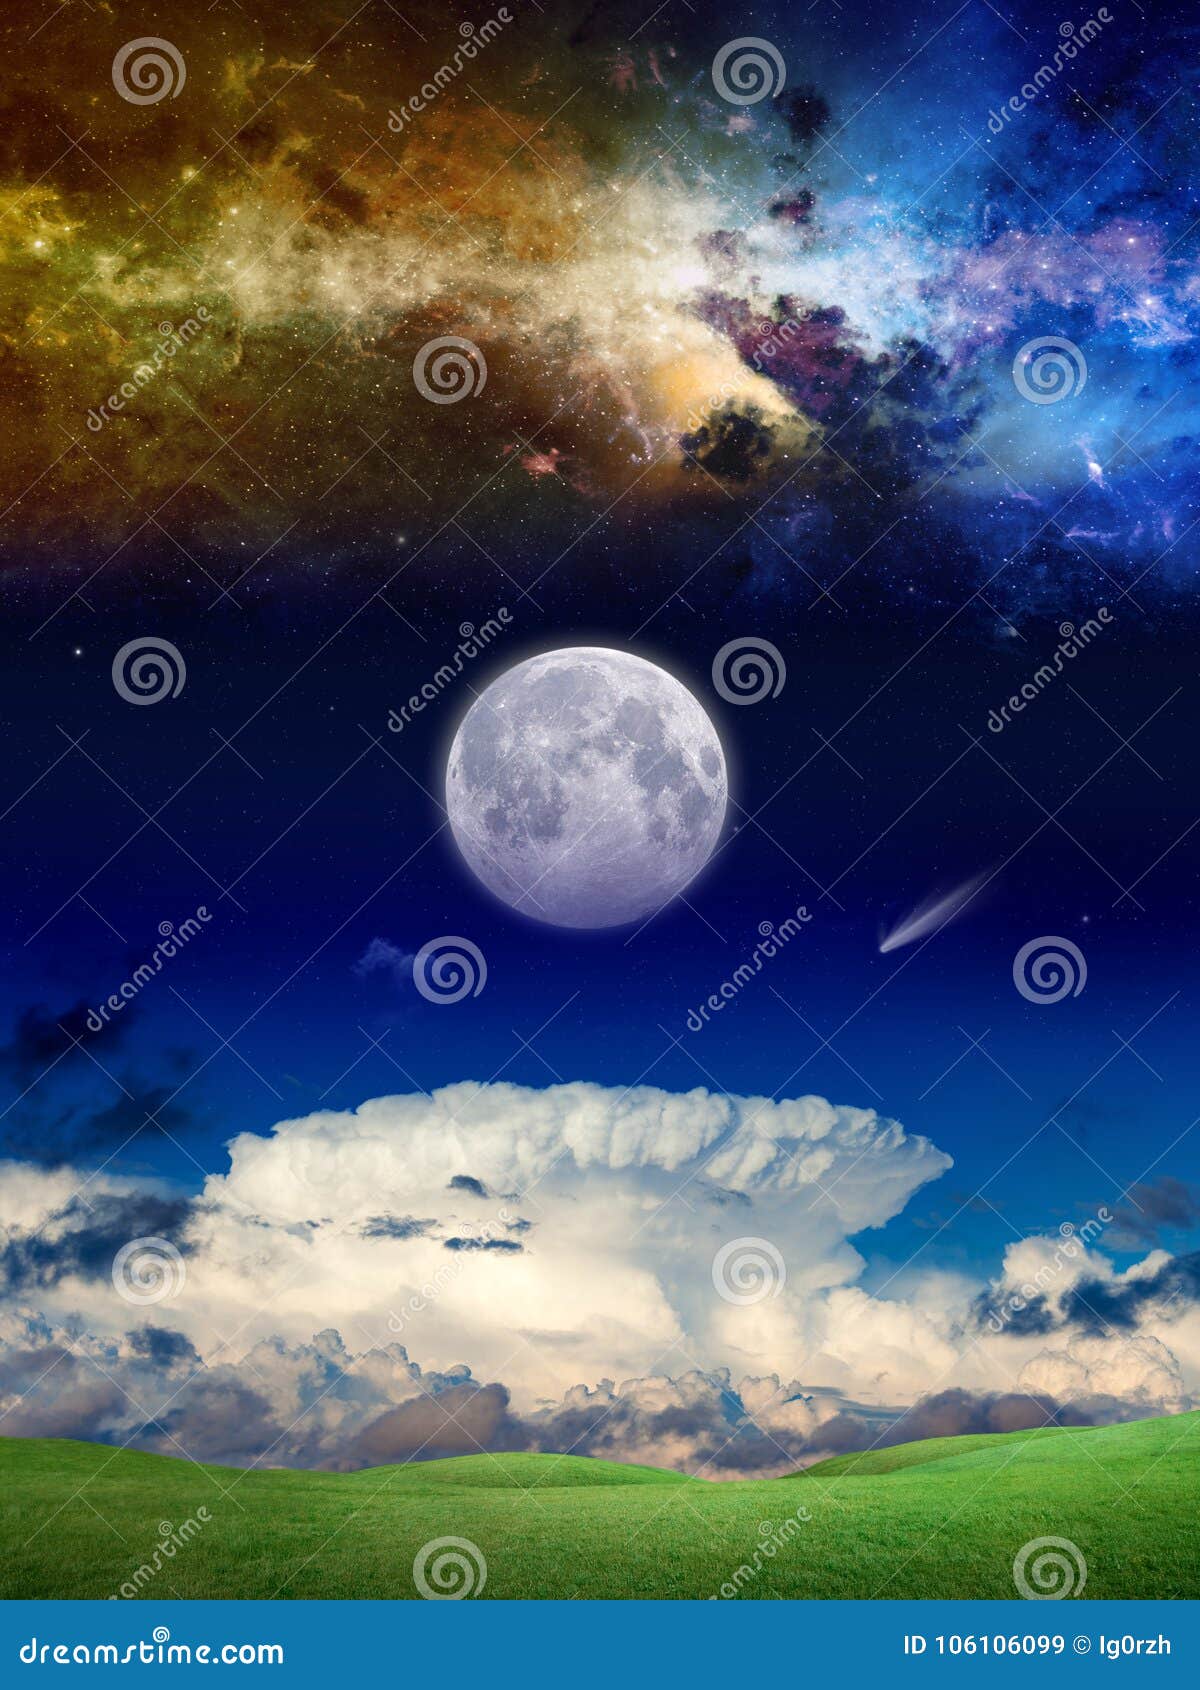 fantastic supernatural background with galaxy, comet and full mo